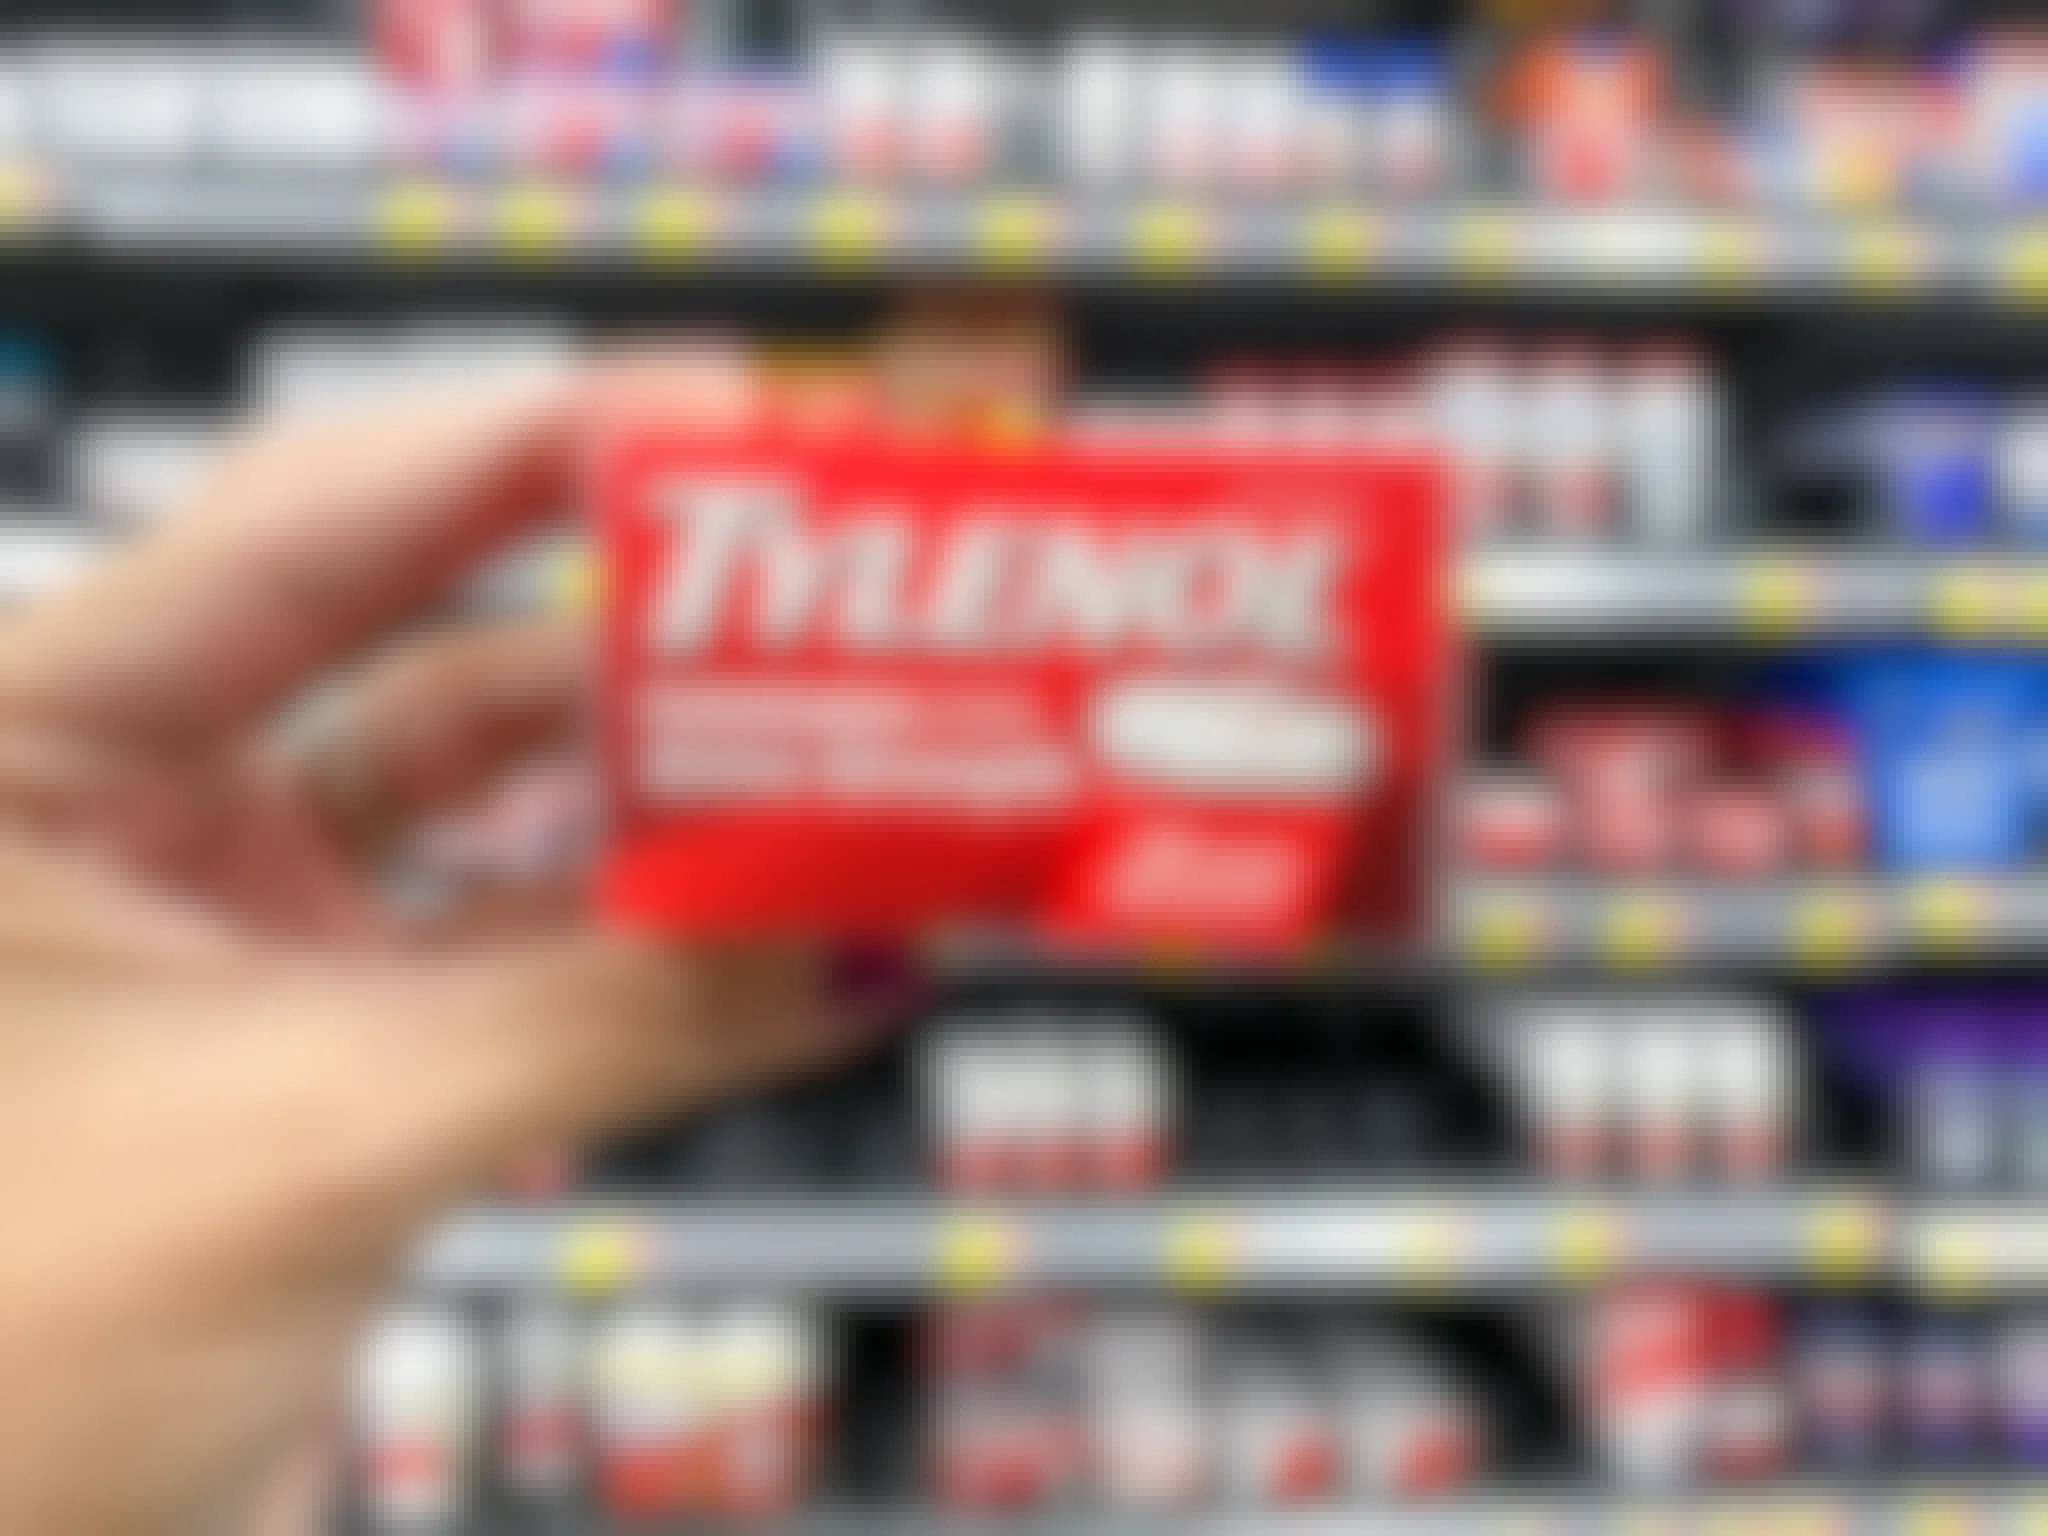 Someone holding up a box of Tylenol in a store